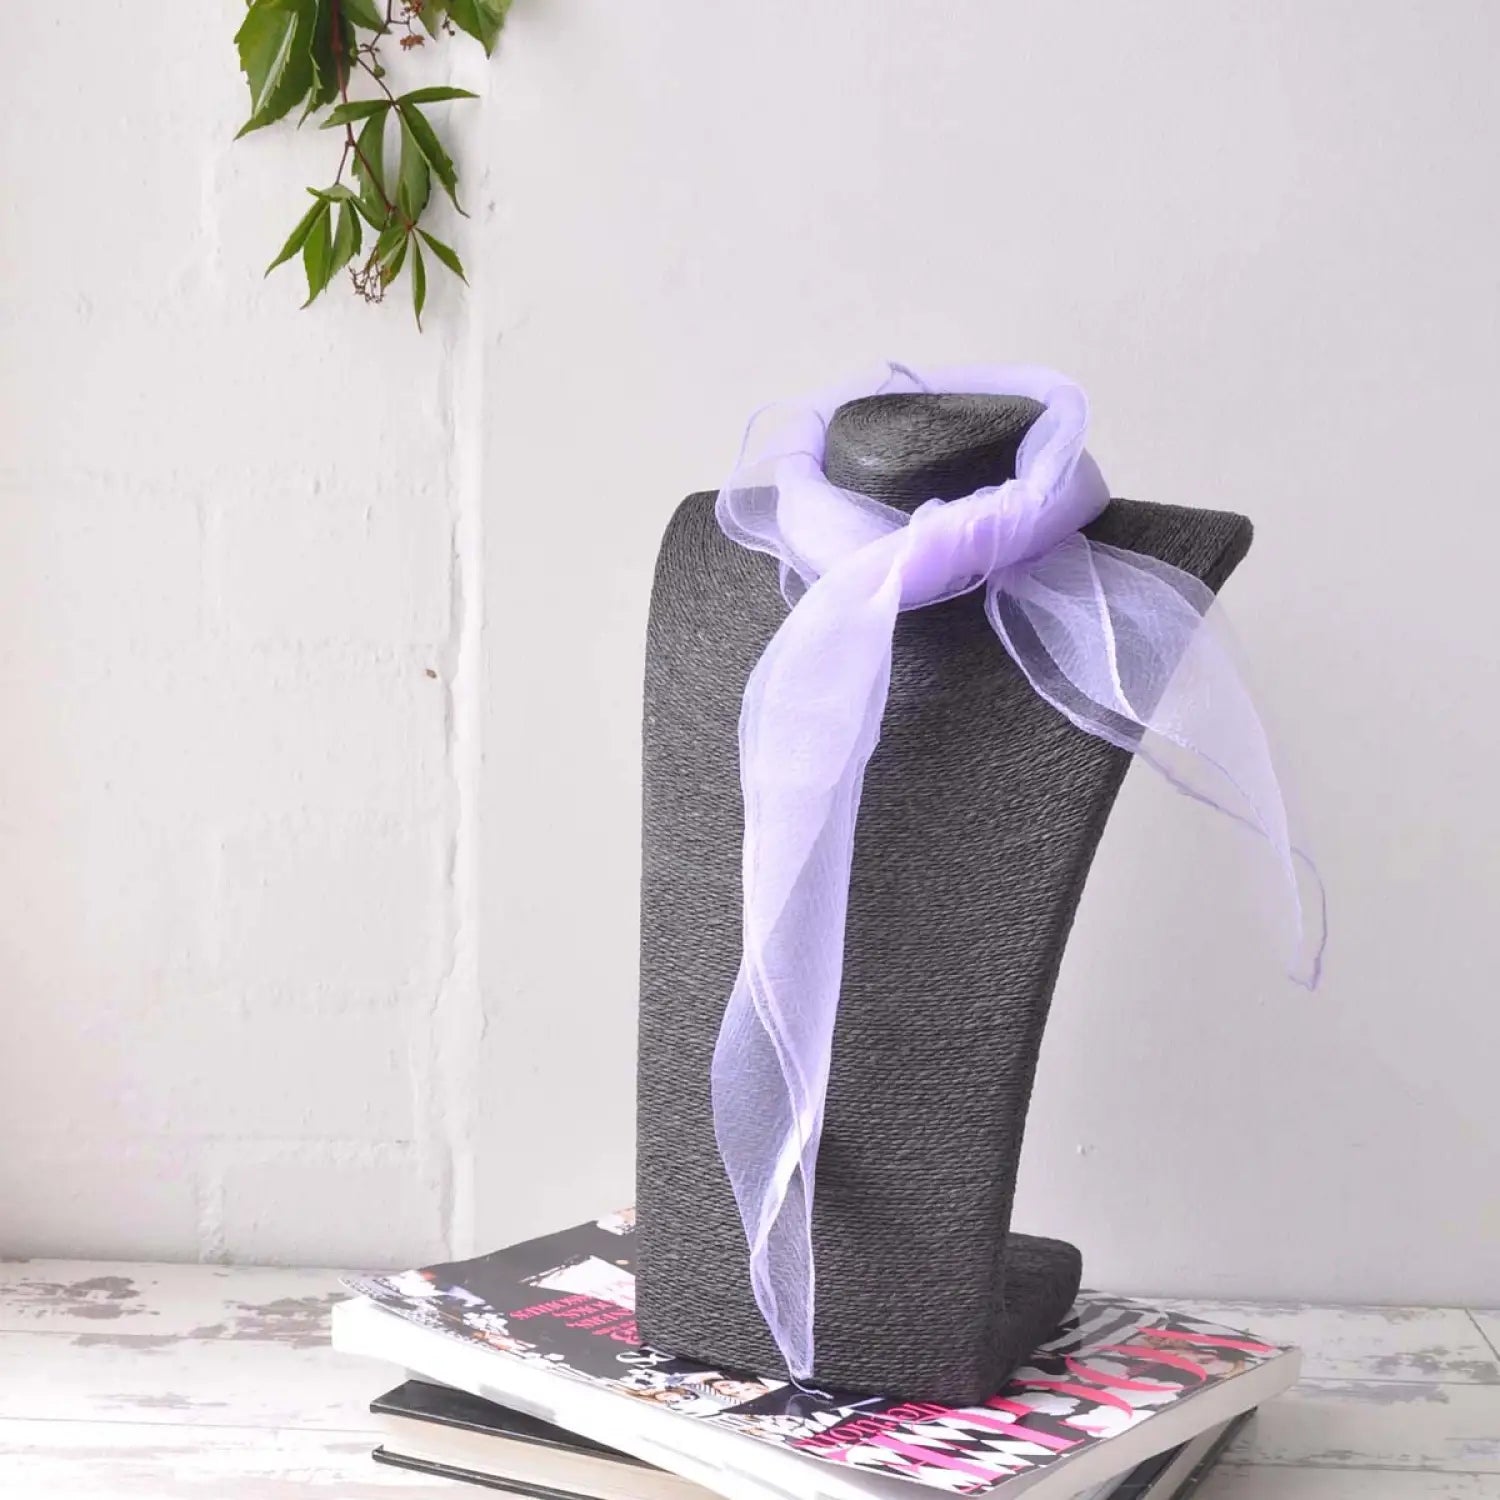 Chiffon square scarf with grey hat and purple ribbon displayed.